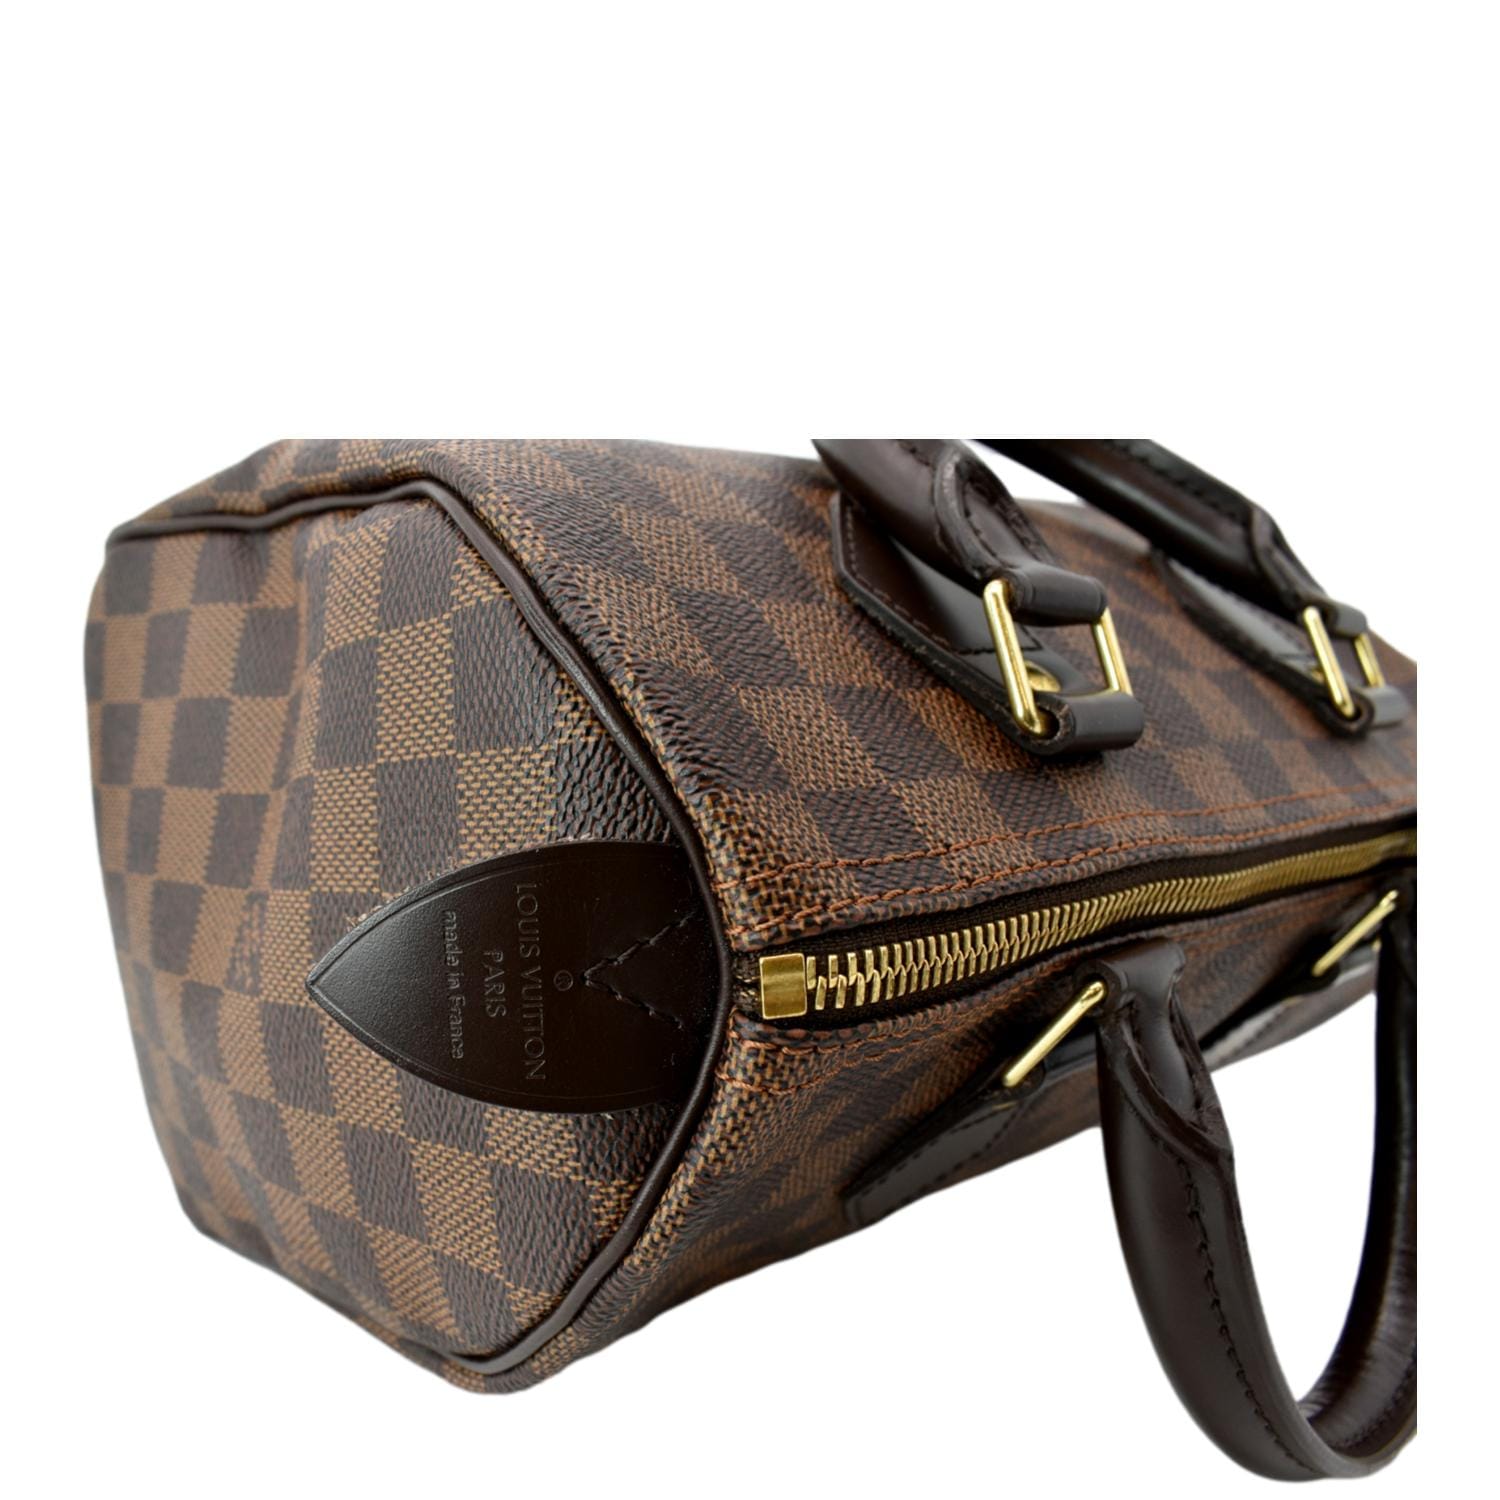 Louis Vuitton - Authenticated Speedy Doctor 25 Handbag - Leather Brown for Women, Very Good Condition